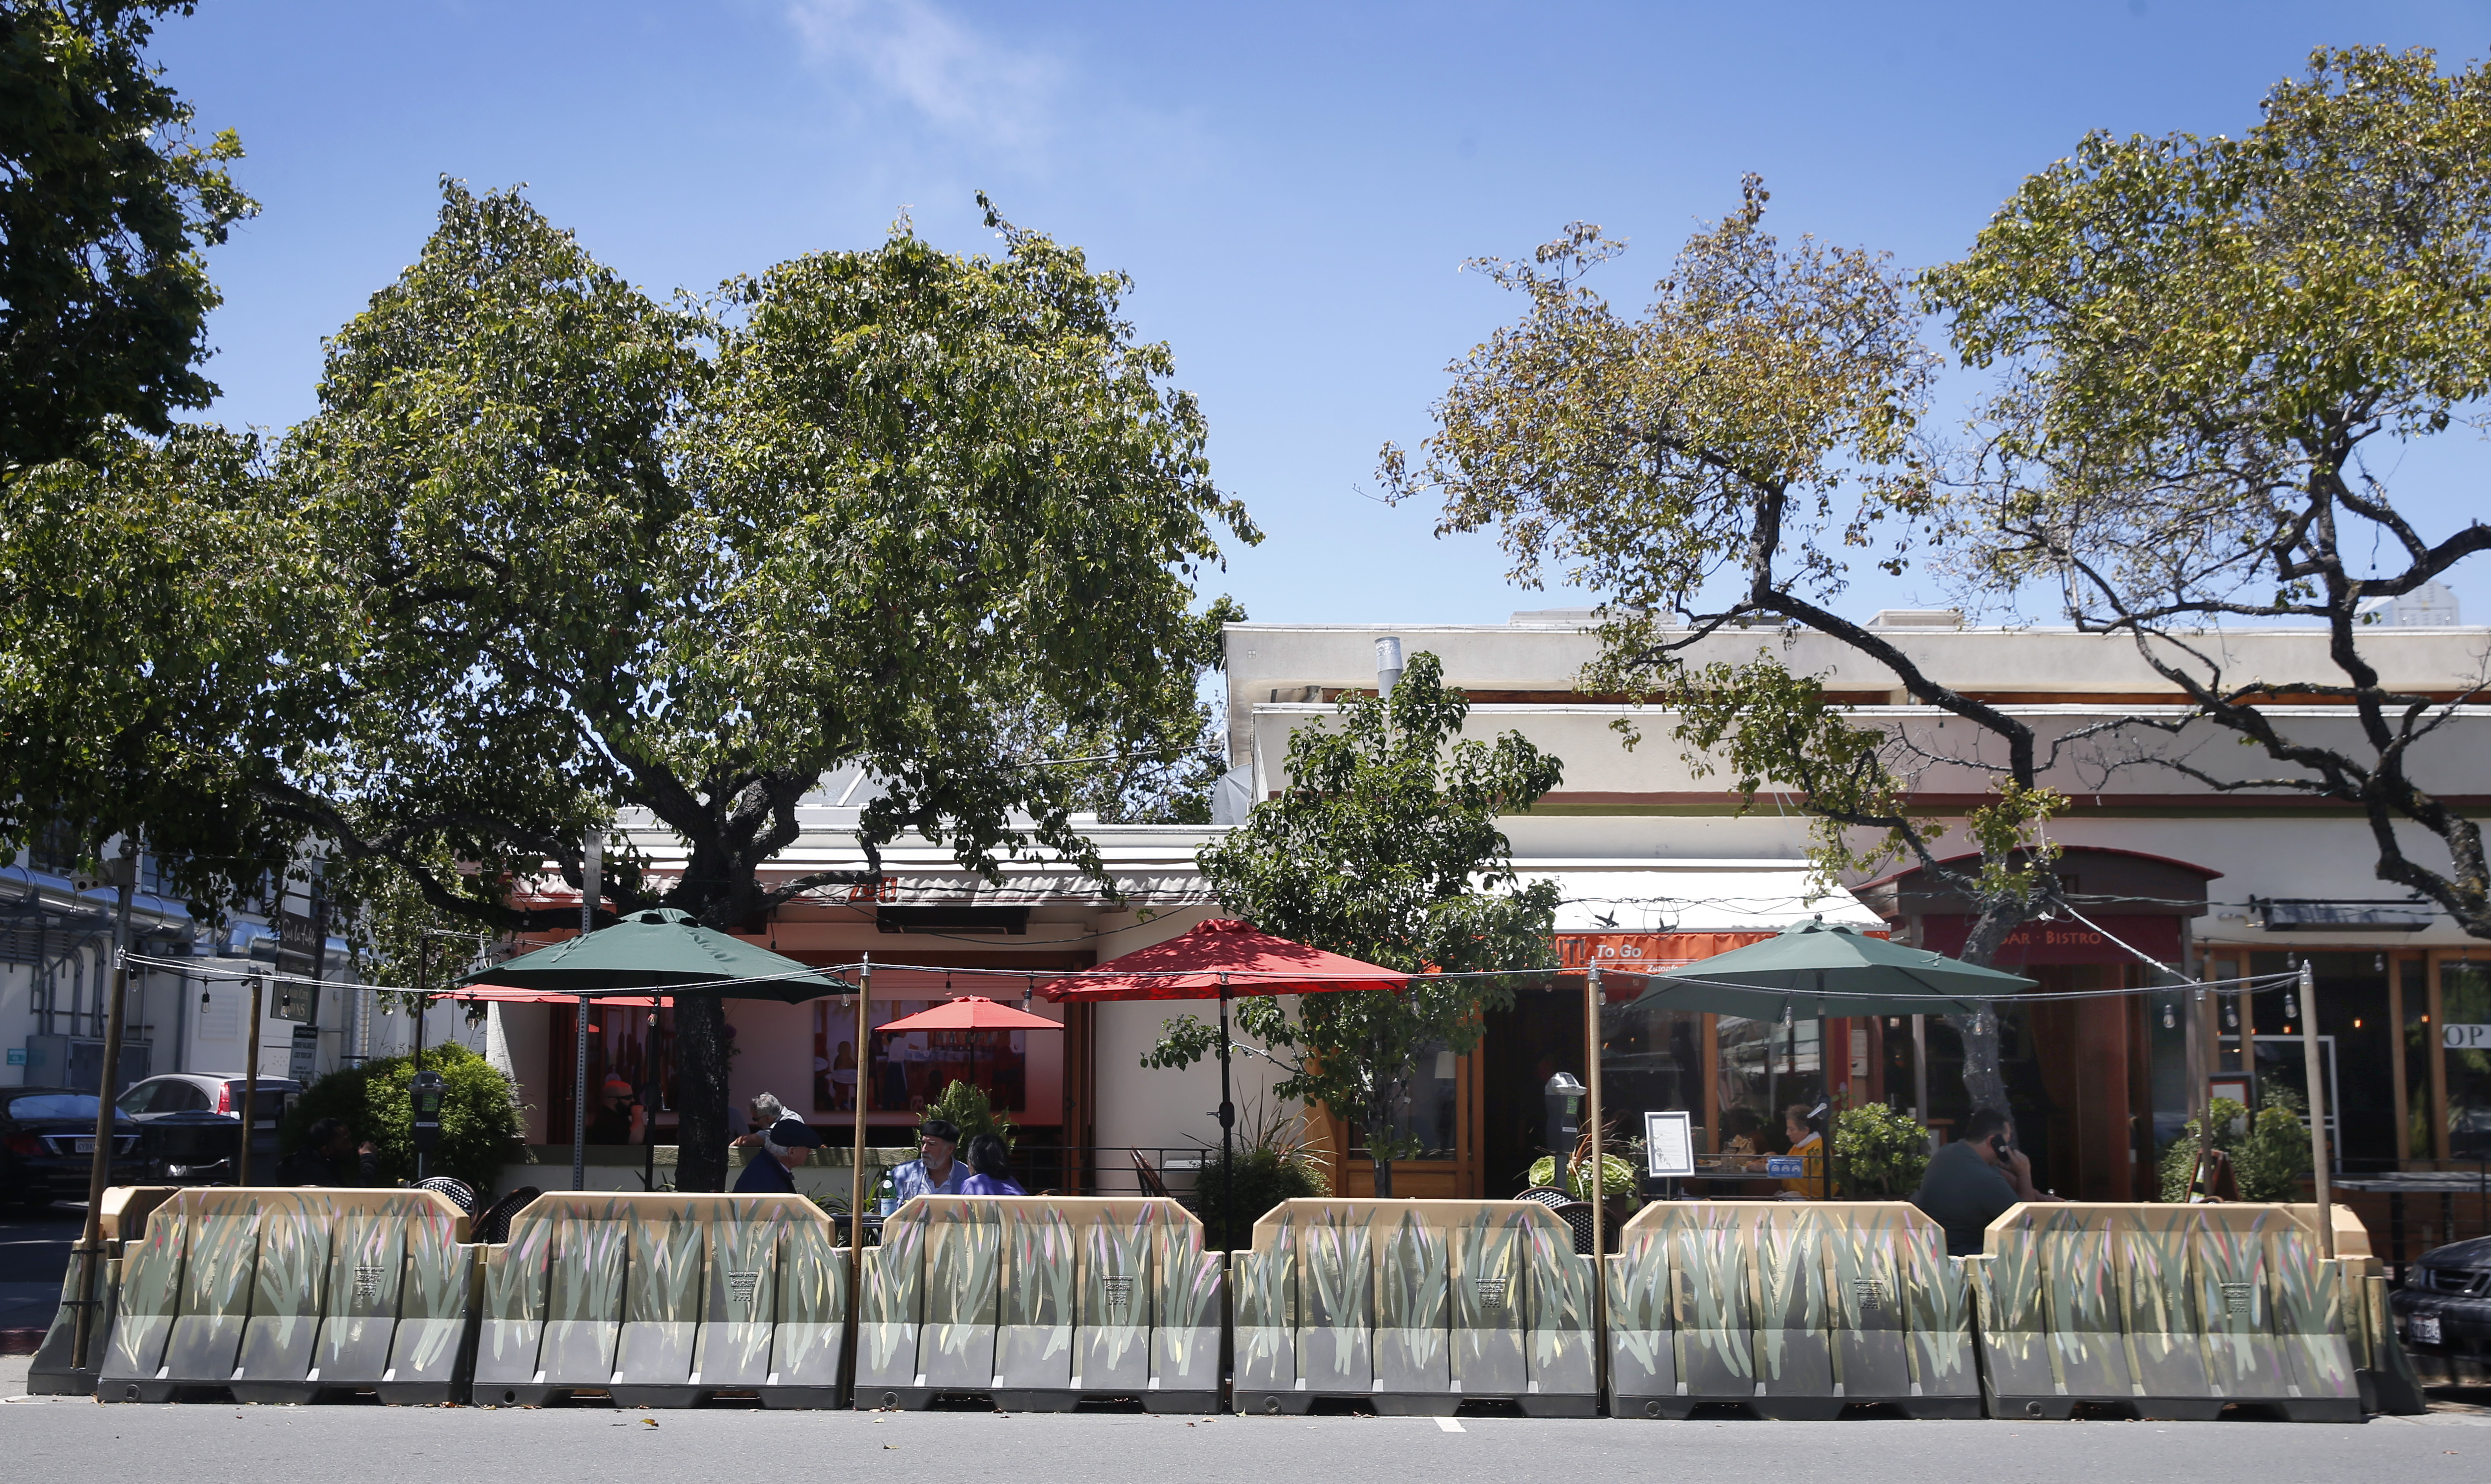 A parklet is created on Fourth Street in front of Zut! restaurant to accommodate outdoor dining in Berkeley, Calif. on Tuesday, June 23, 2020